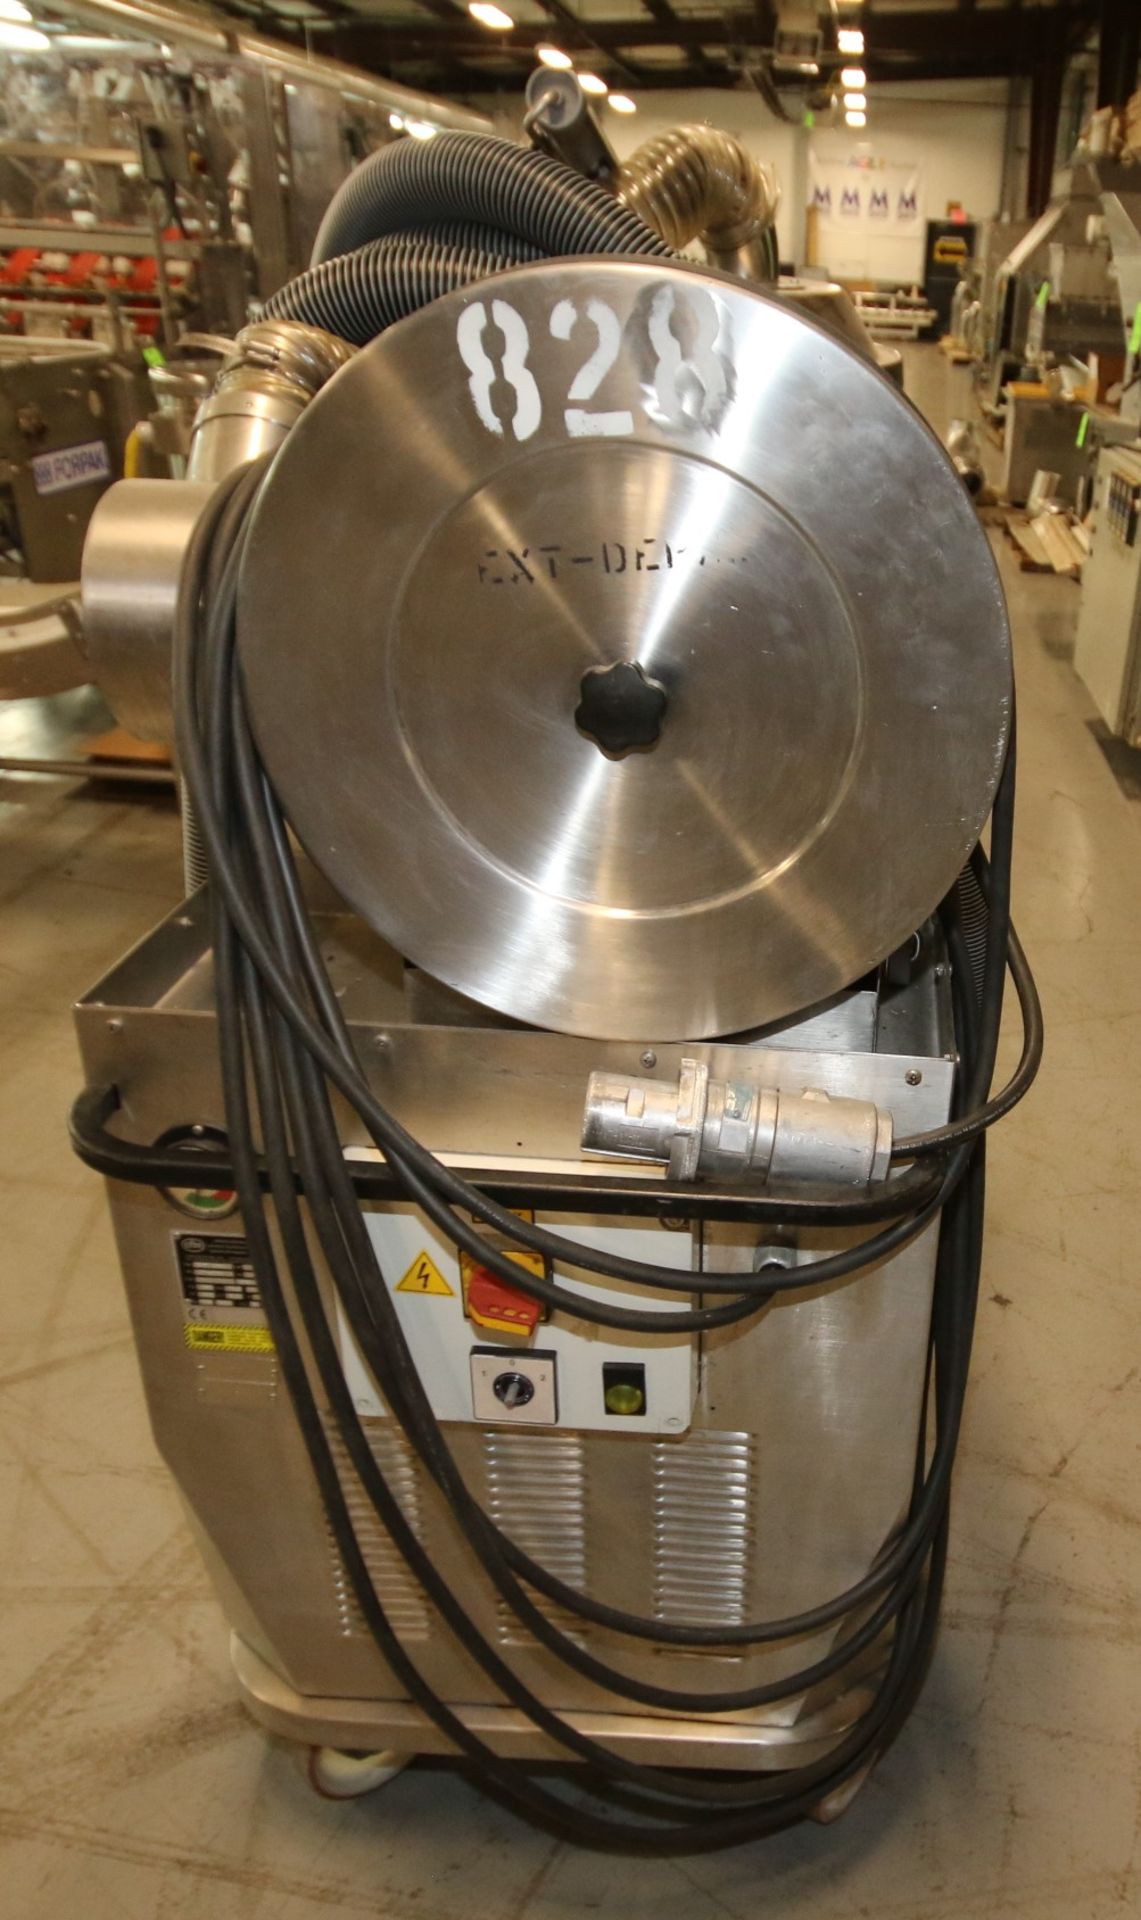 CFM Portable S/S Industrial Vacuum, Model 3307 AXXX, SN 07AB731, 440V 3 Phase with Hose (W439) - Image 3 of 4